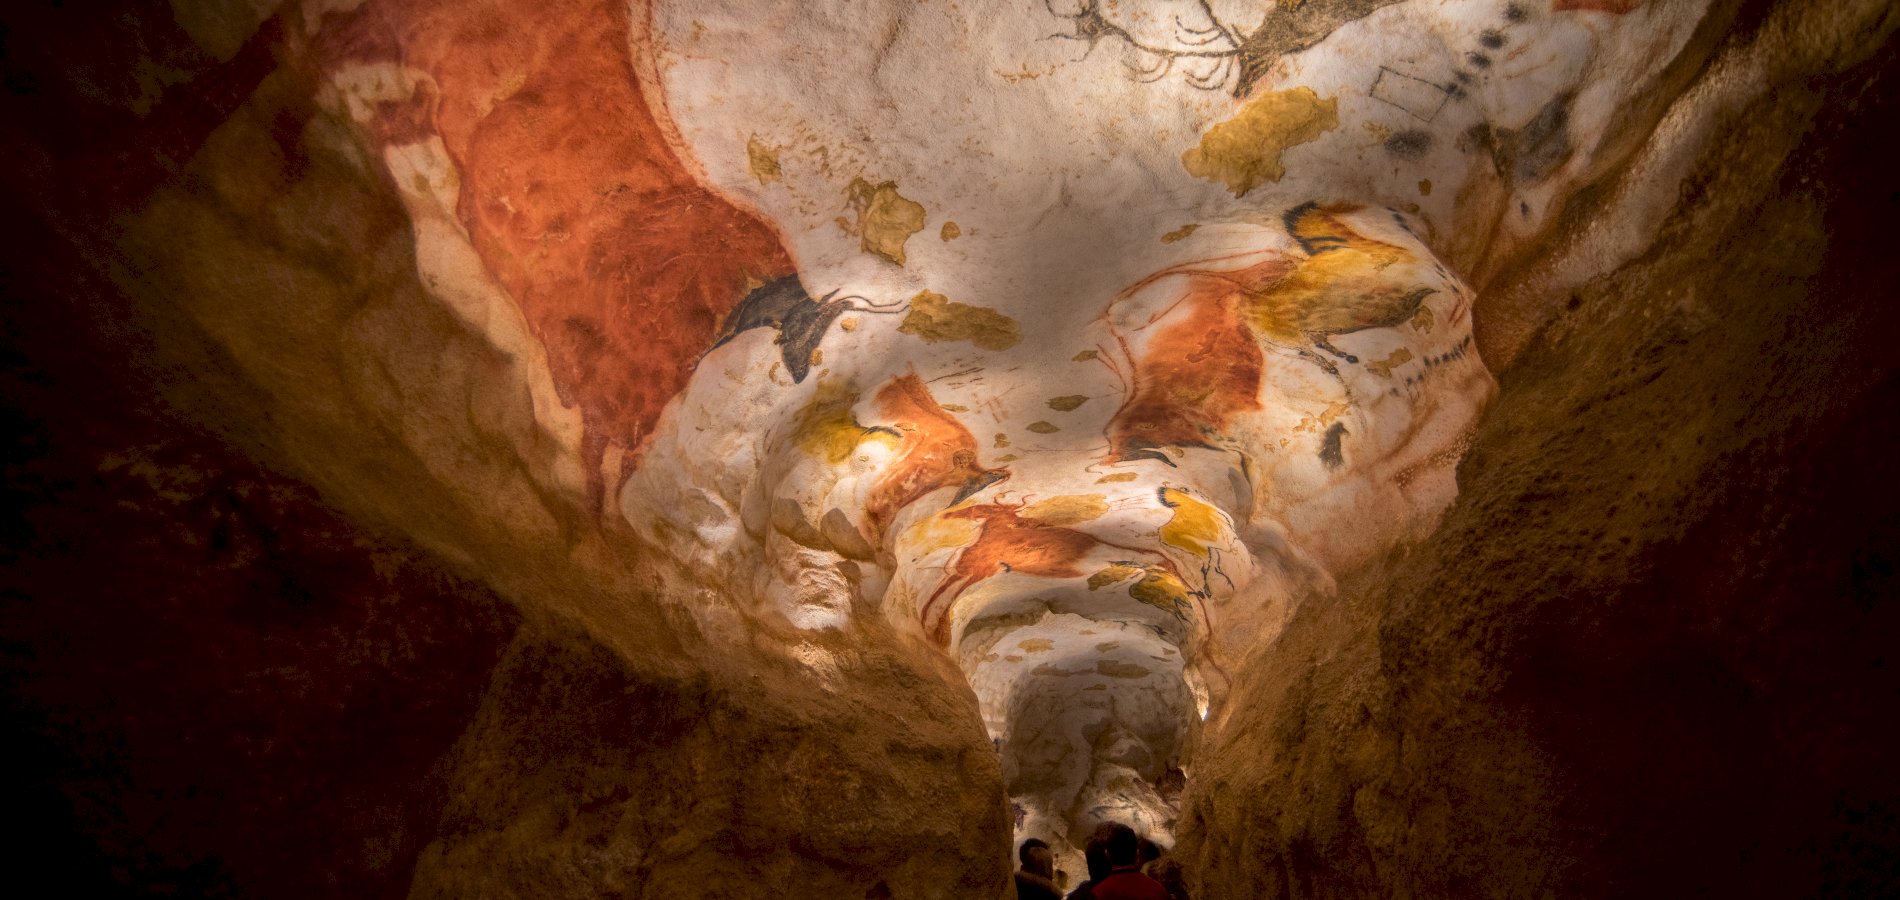 Ophorus Tours - From Sarlat to Lascaux IV Museum & Cave half-day tour